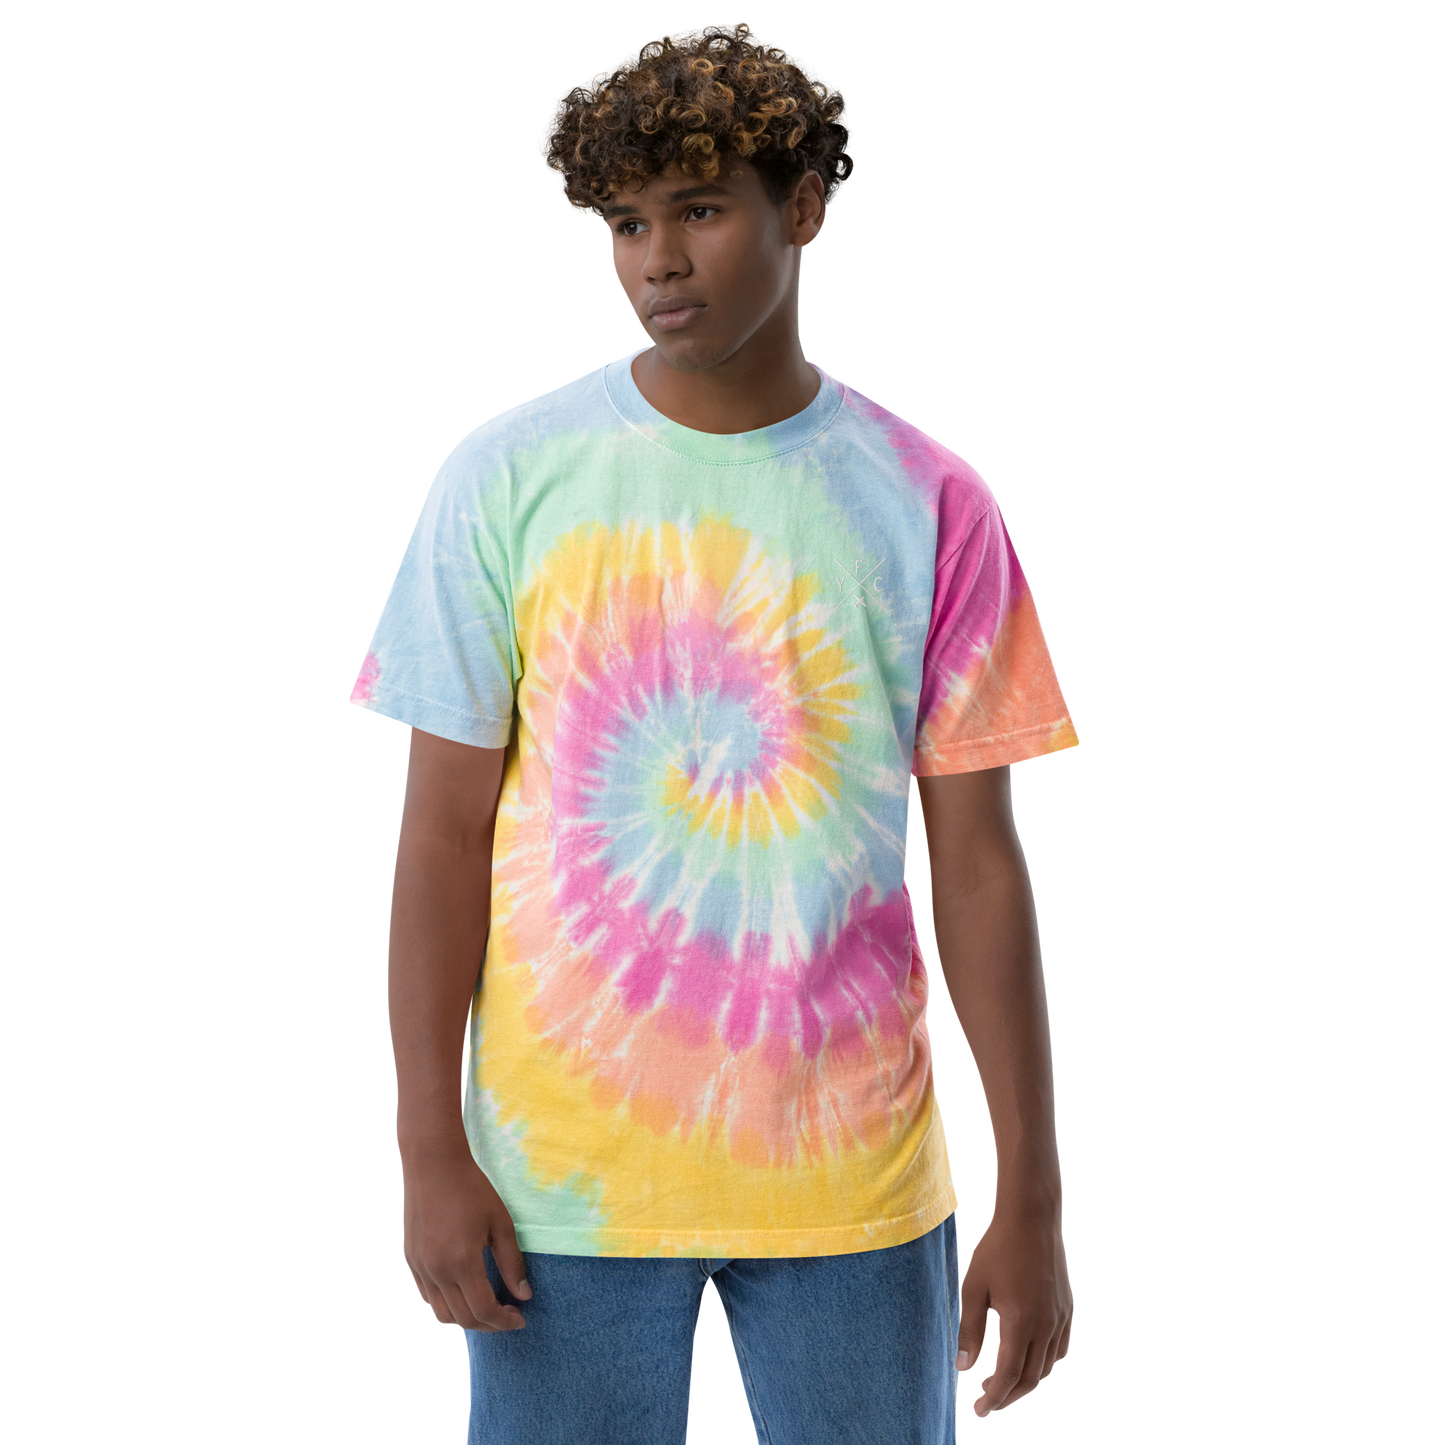 YHM Designs - YFC Fredericton Oversized Tie-Dye T-Shirt - Crossed-X Design with Airport Code and Vintage Propliner - White Embroidery - Image 04